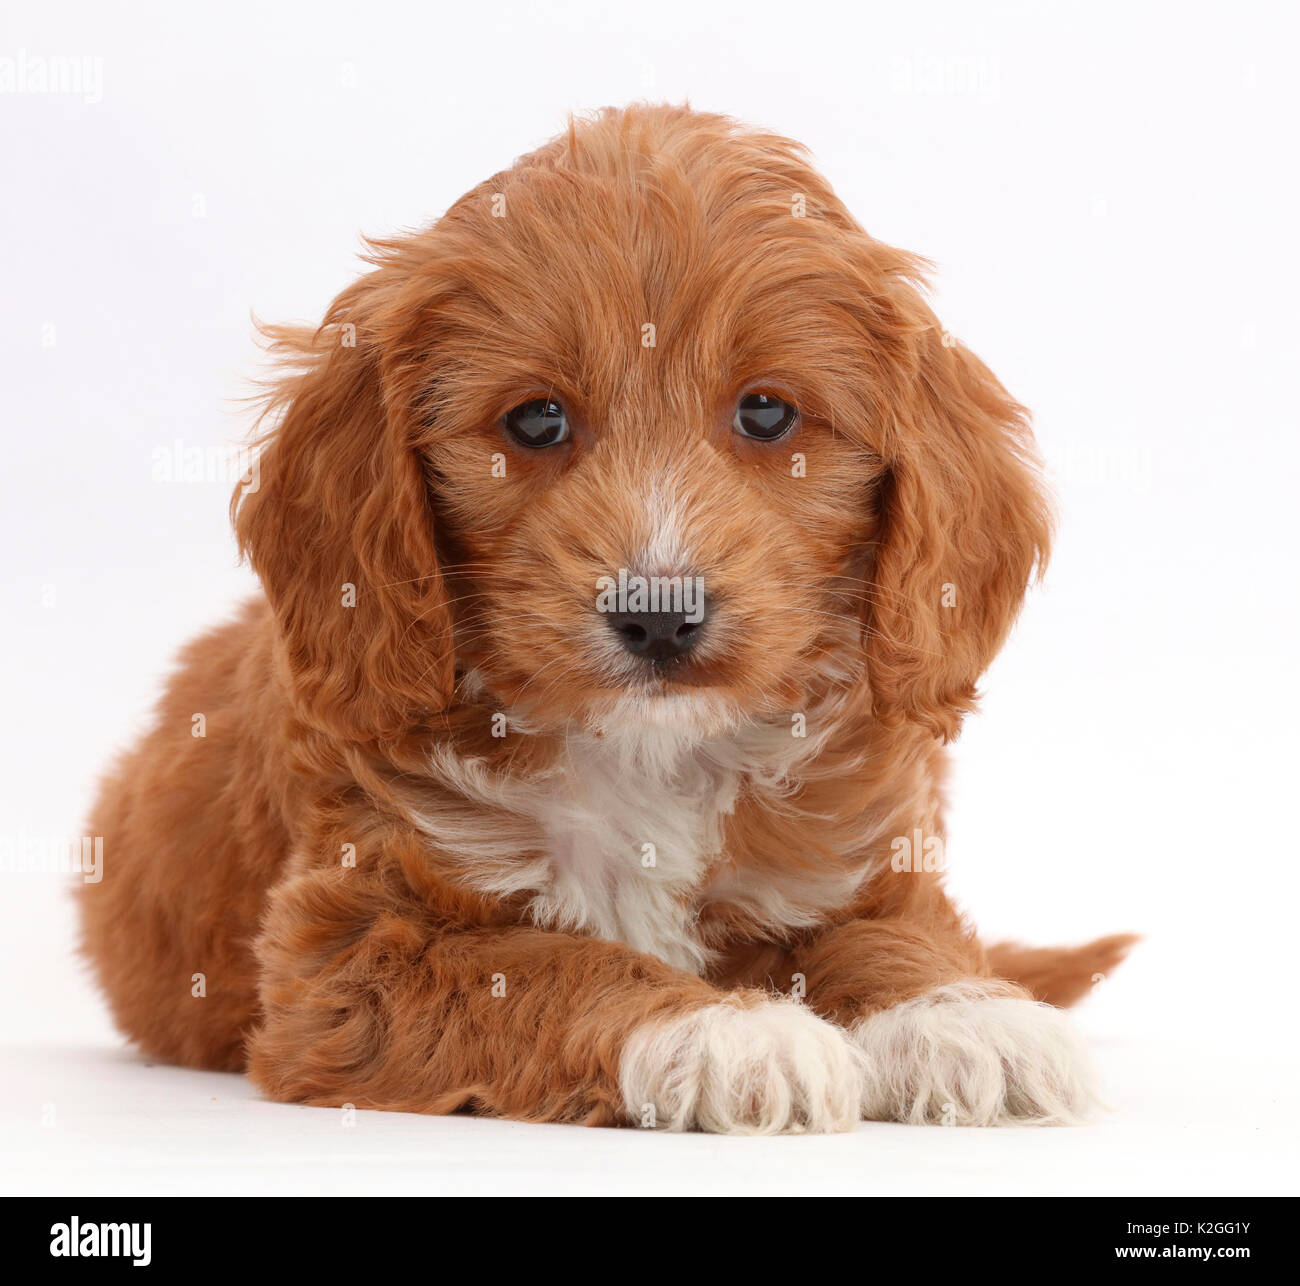 Red Toy Cockapoo puppy Stock Photo - Alamy